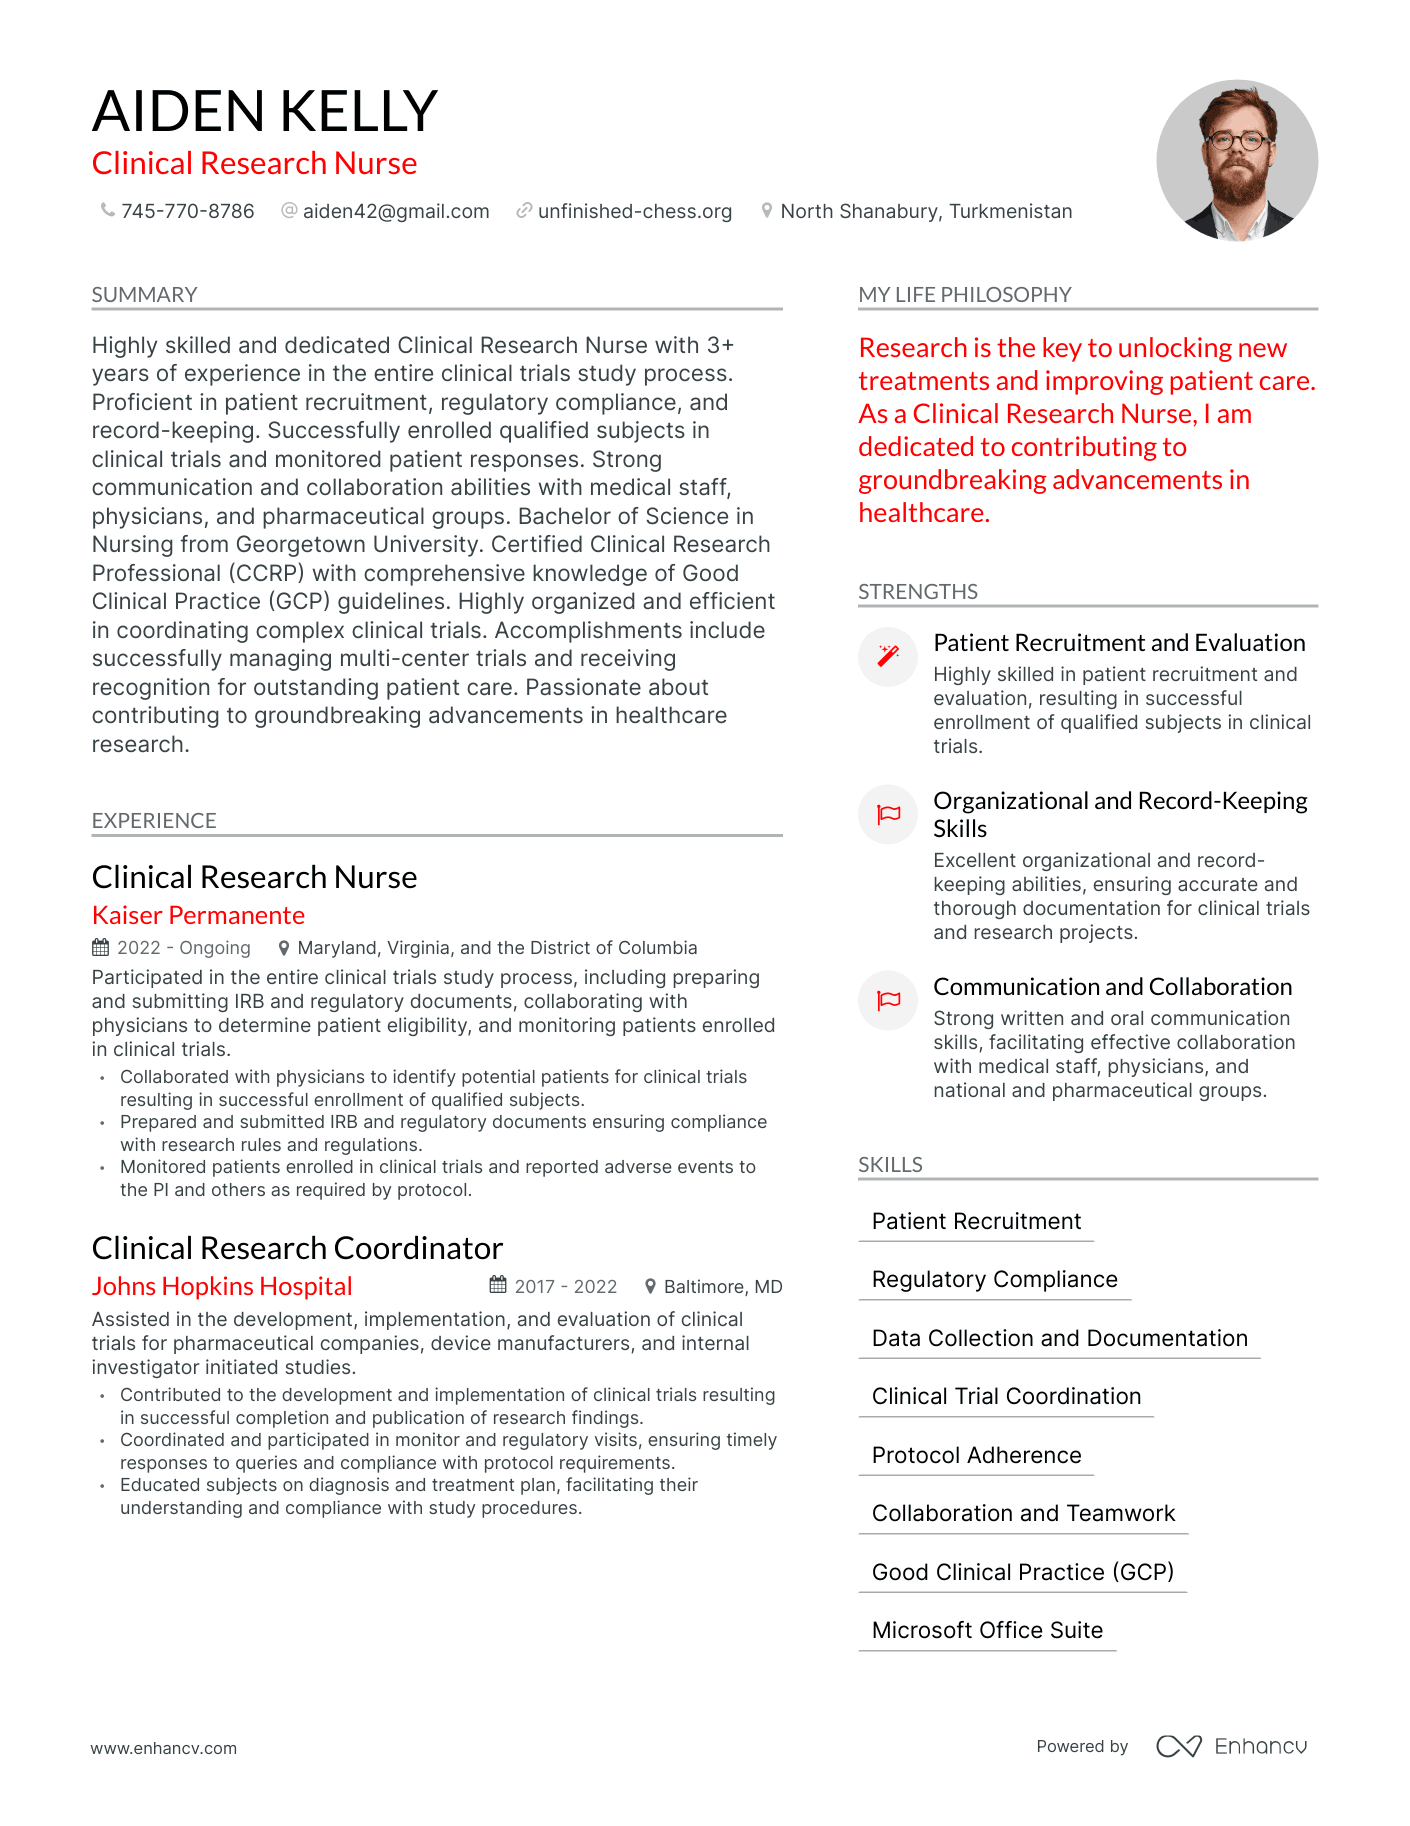 Clinical Research Nurse resume example